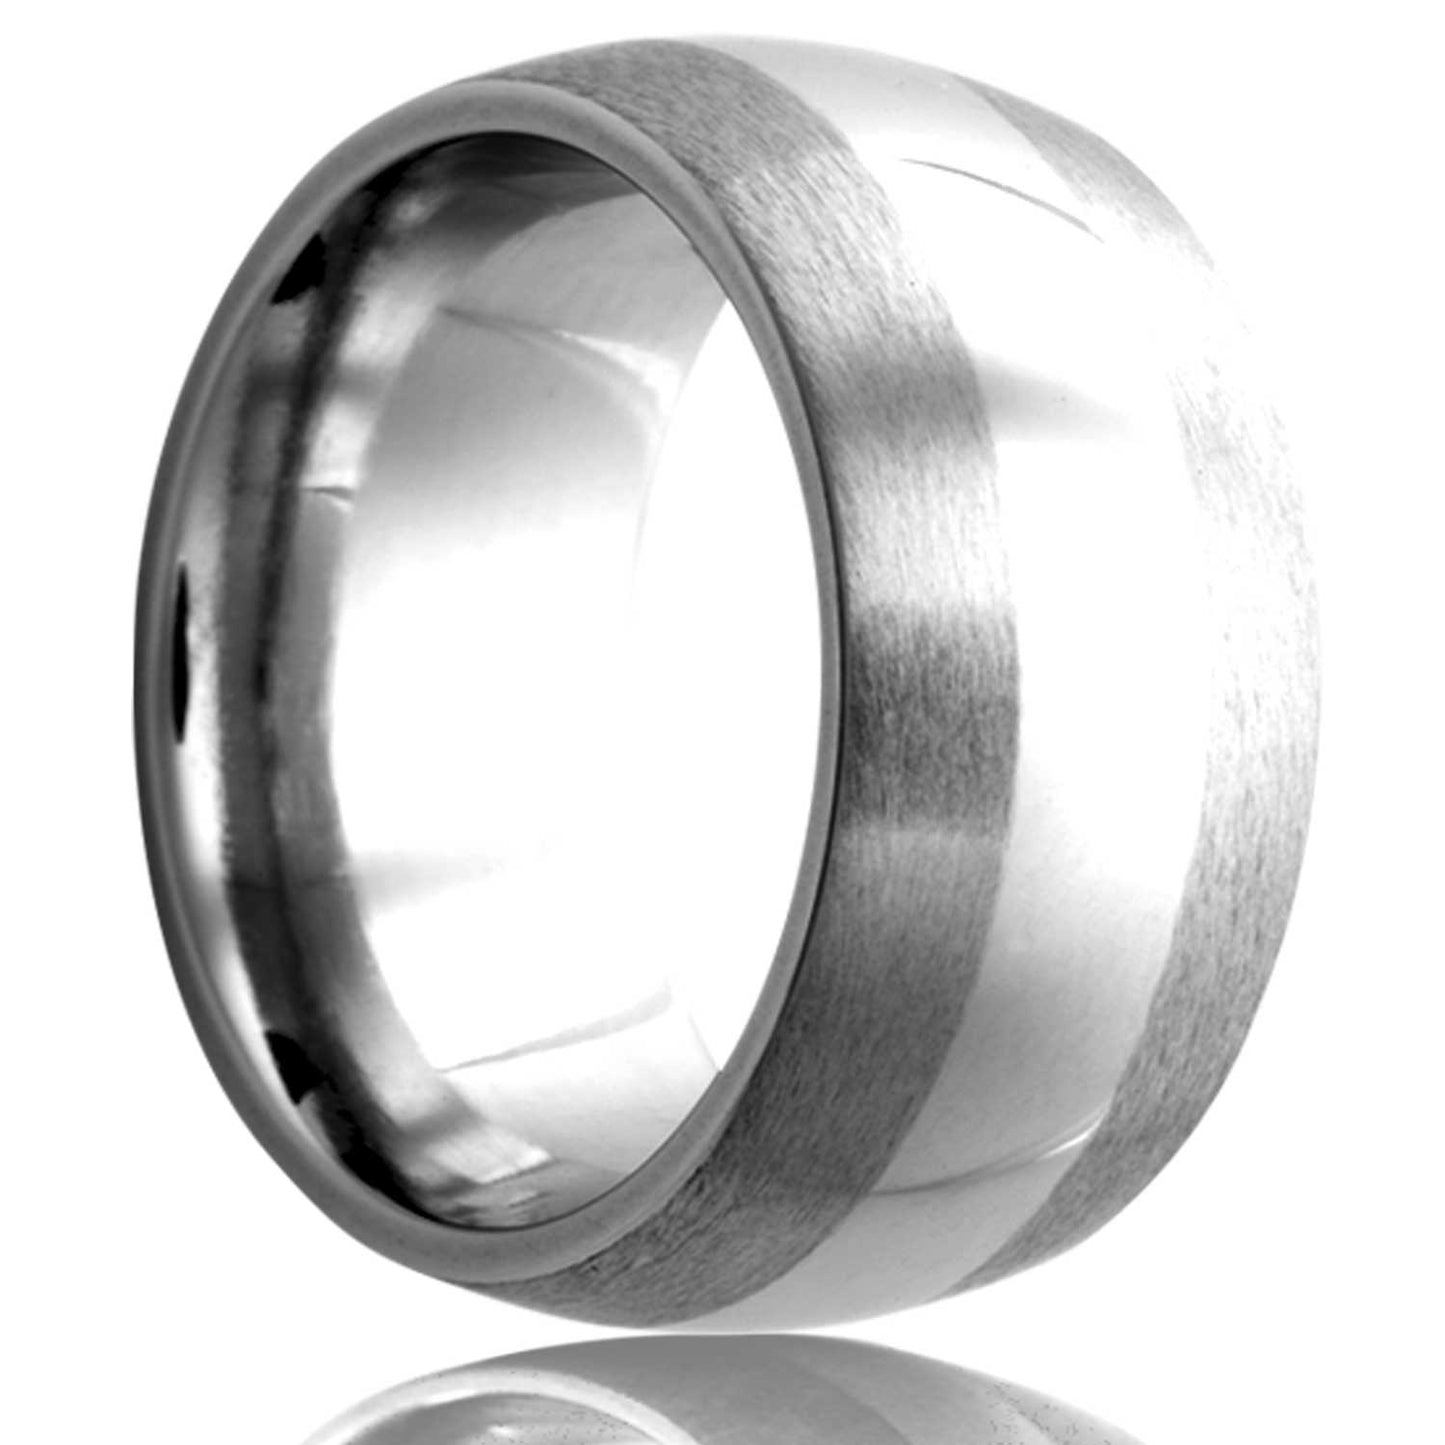 A domed satin finish cobalt wedding band with polished stripe displayed on a neutral white background.